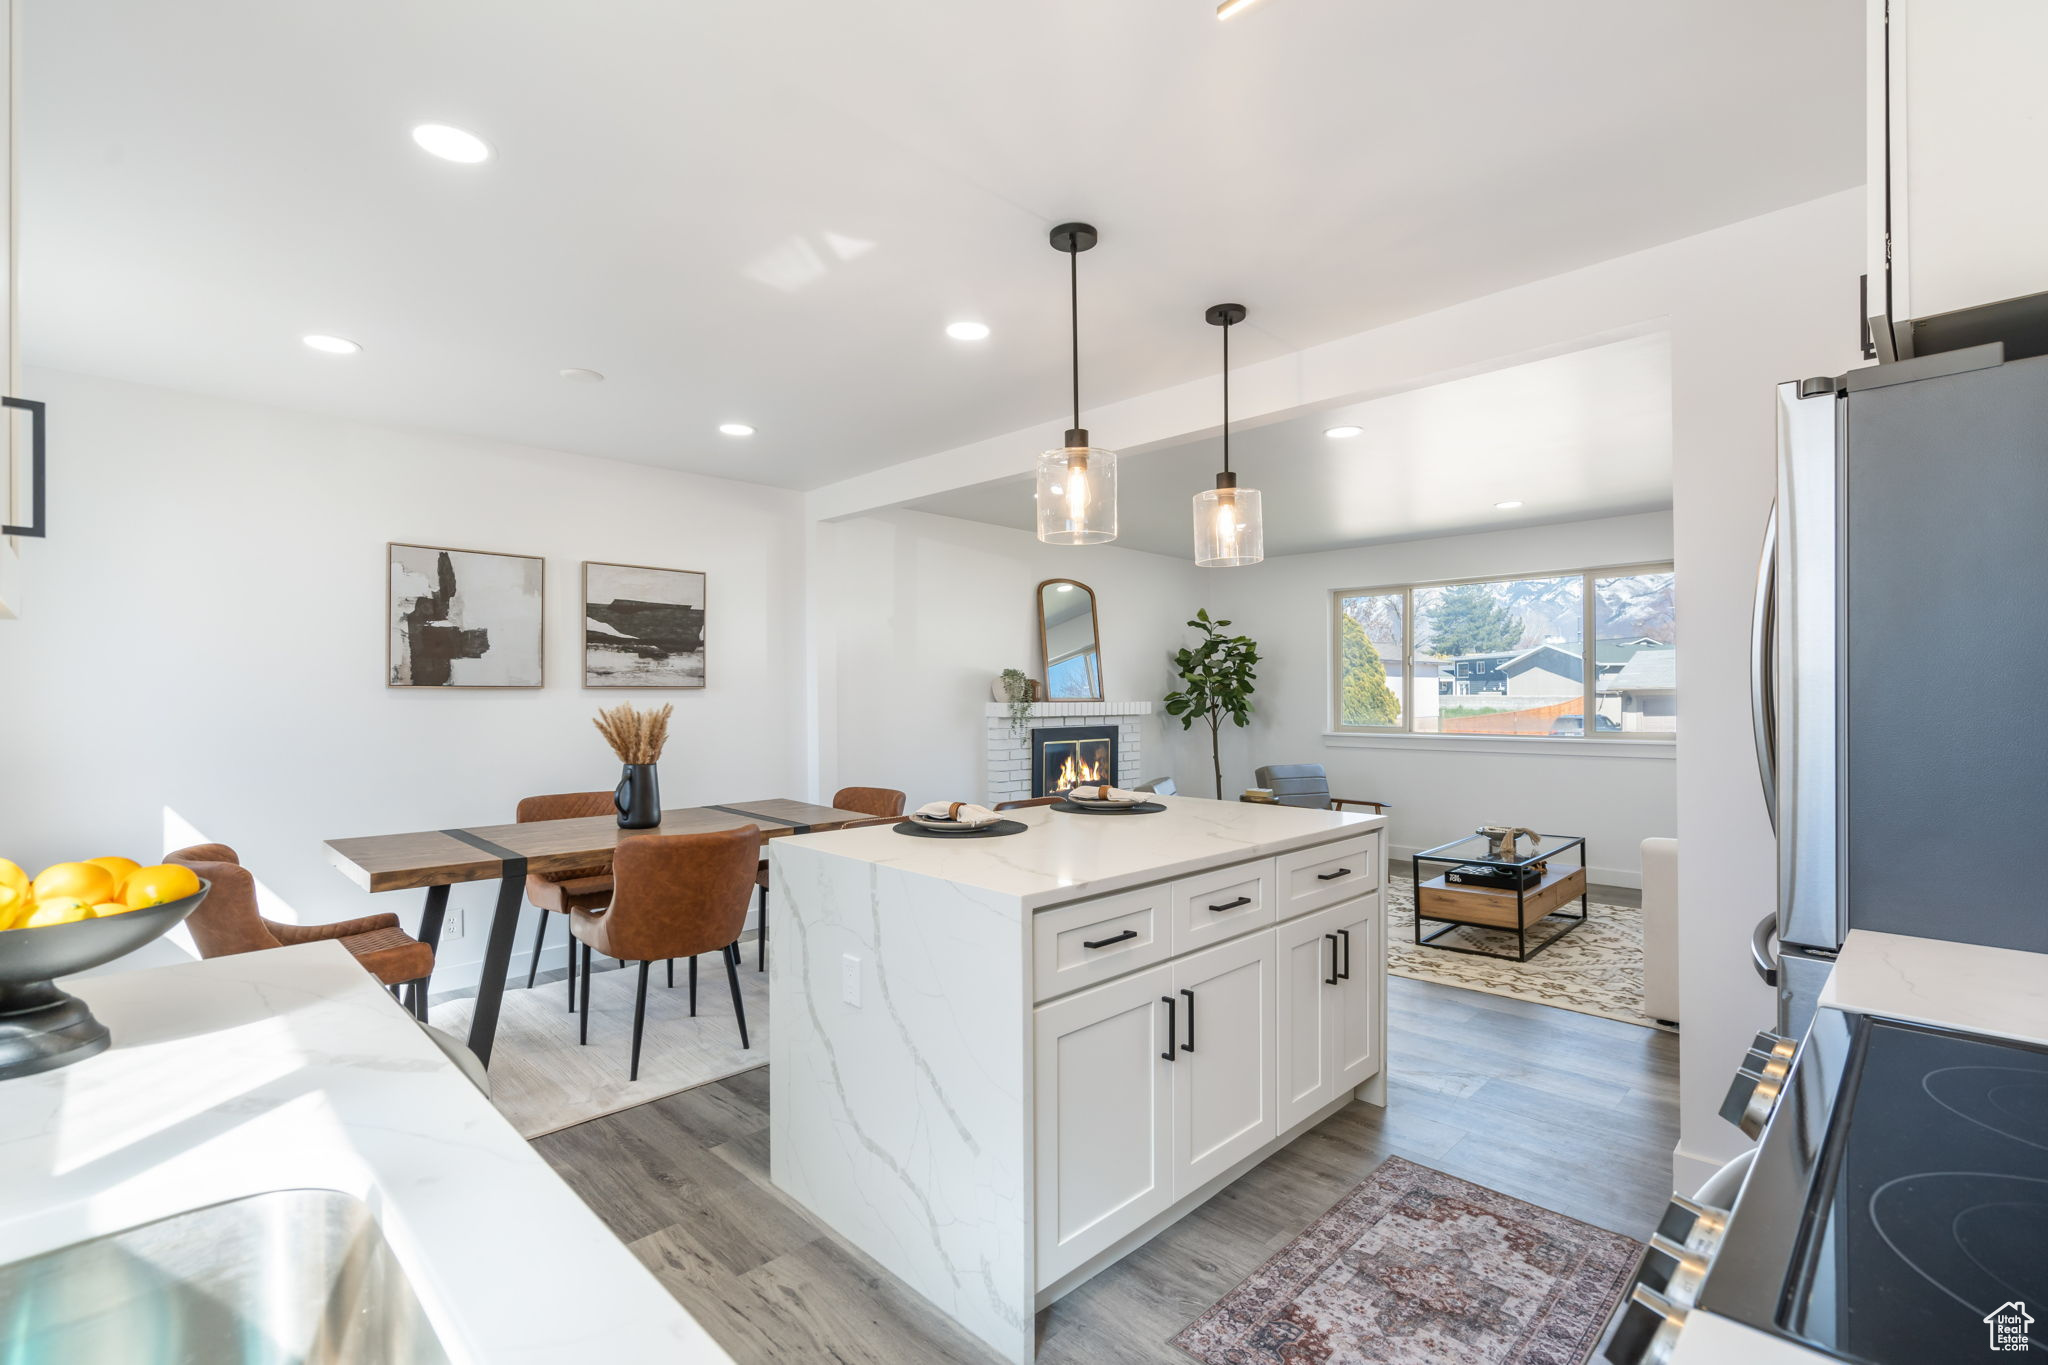 Kitchen featuring decorative light fixtures, light hardwood / wood-style floors, white cabinets, stainless steel fridge, and a fireplace